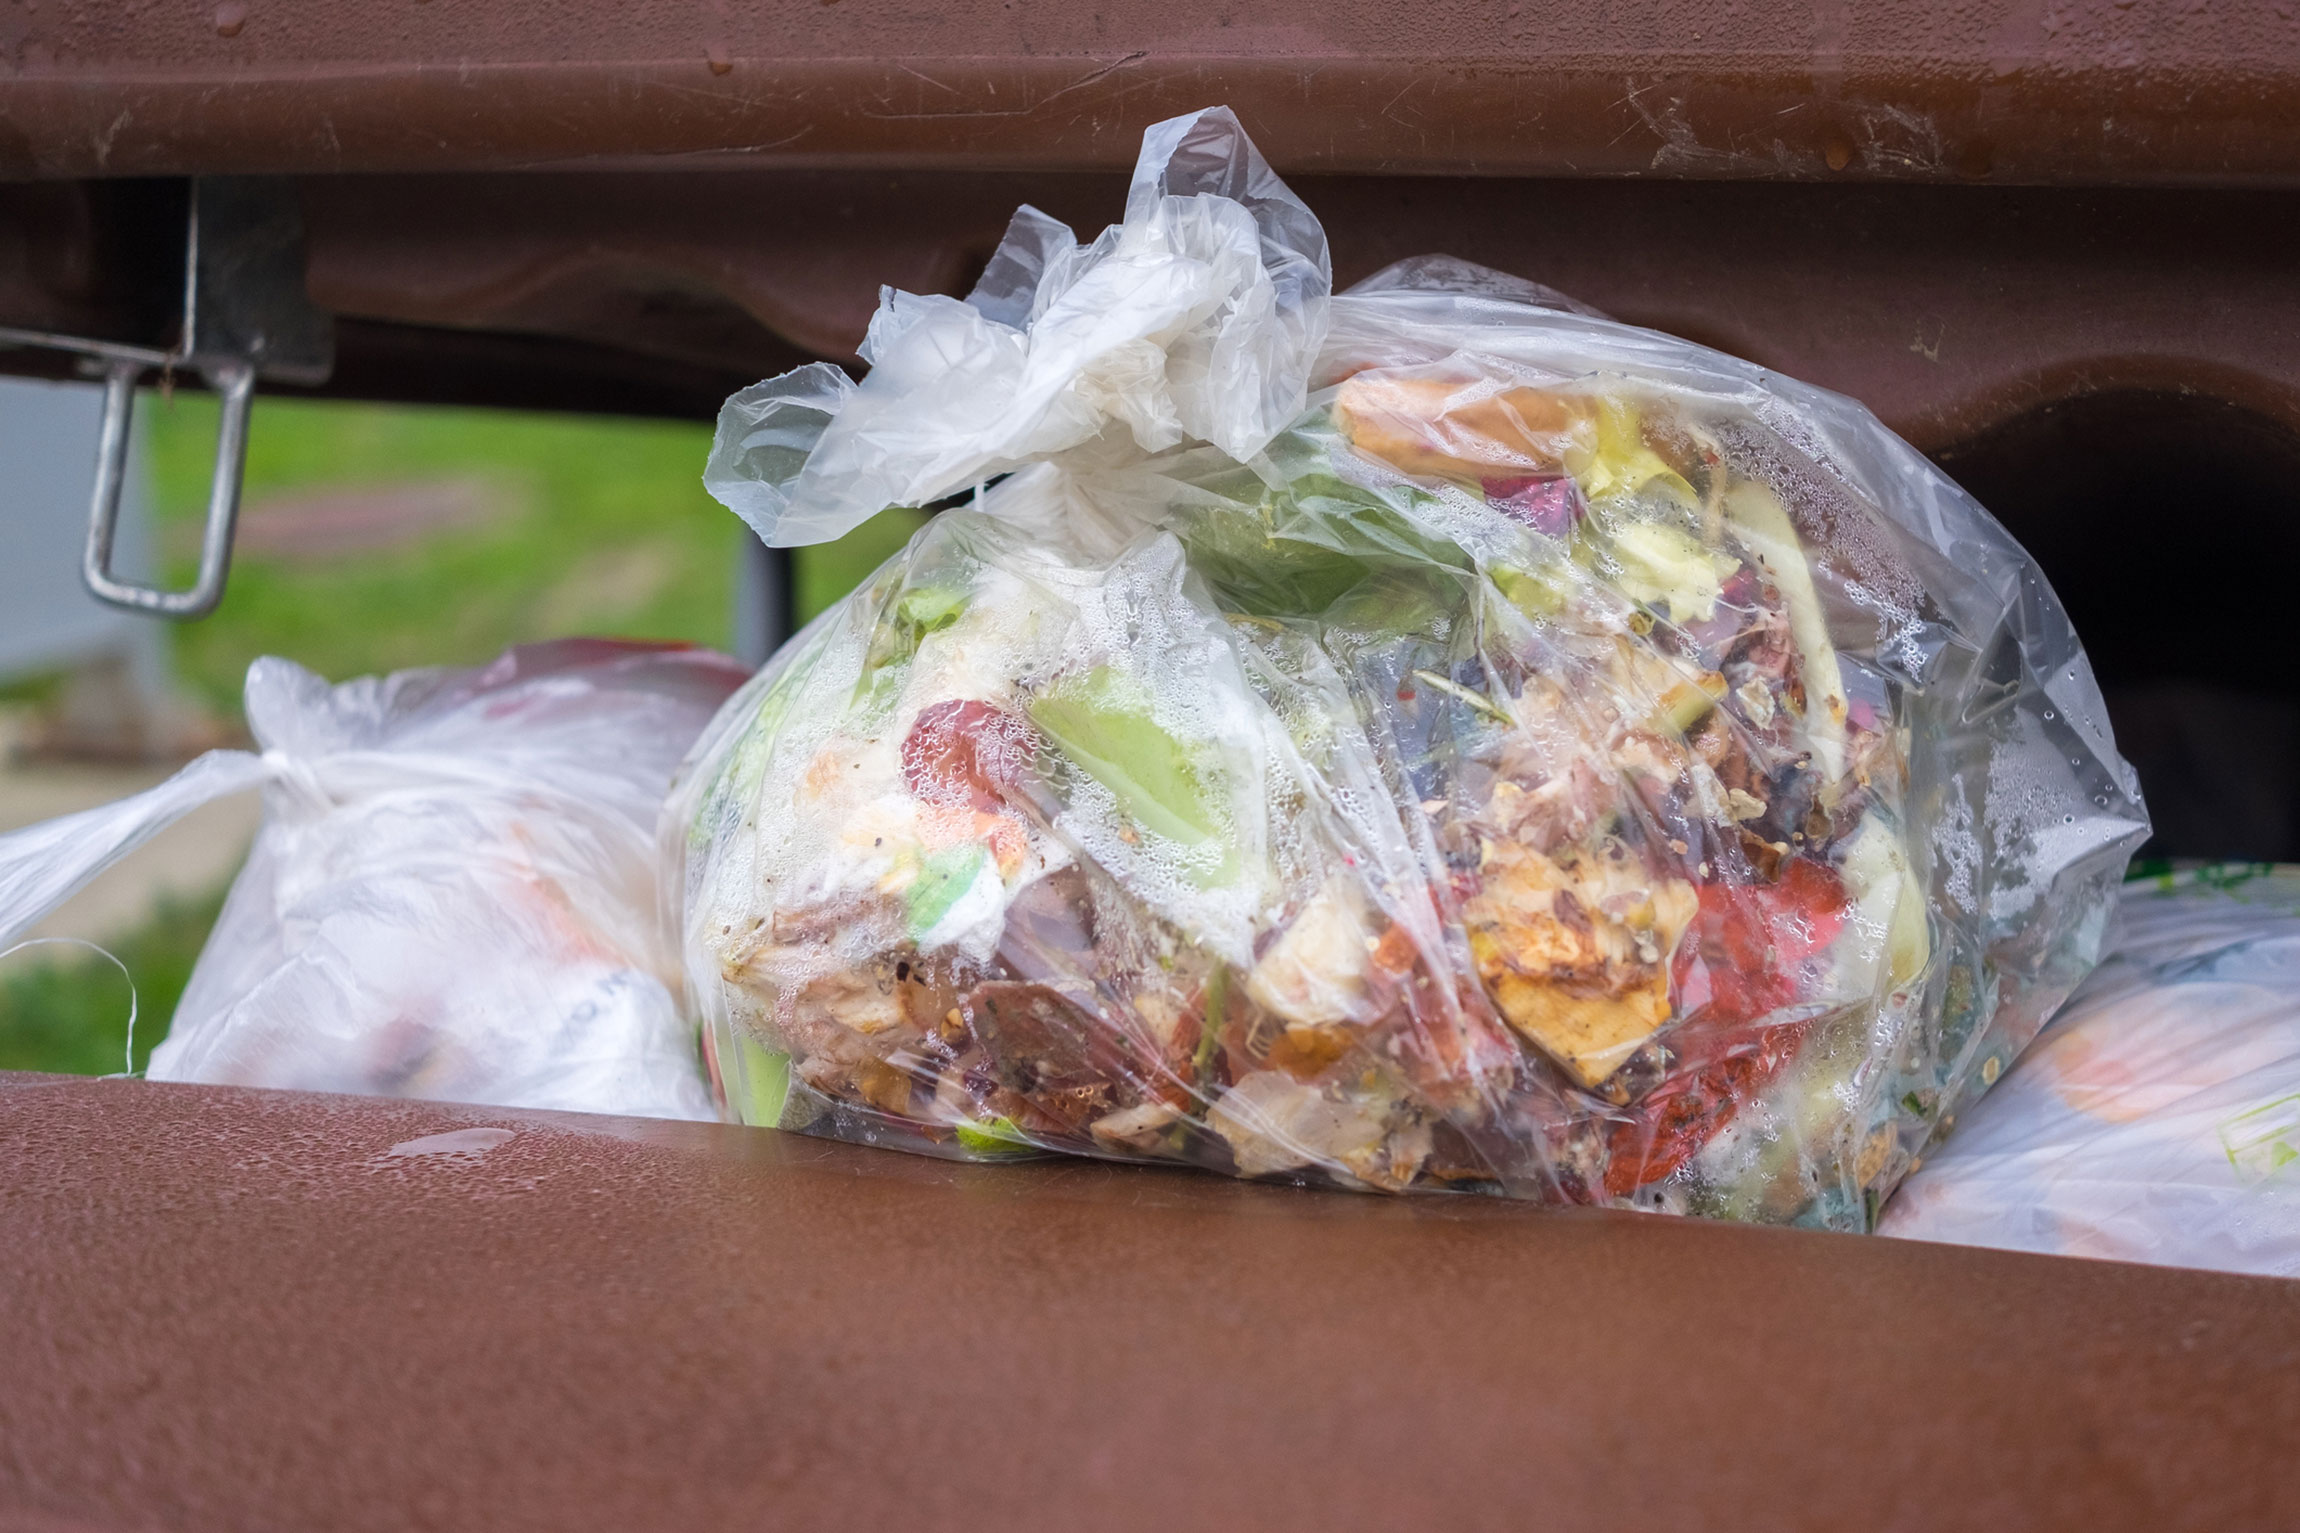 Food waste and the environment